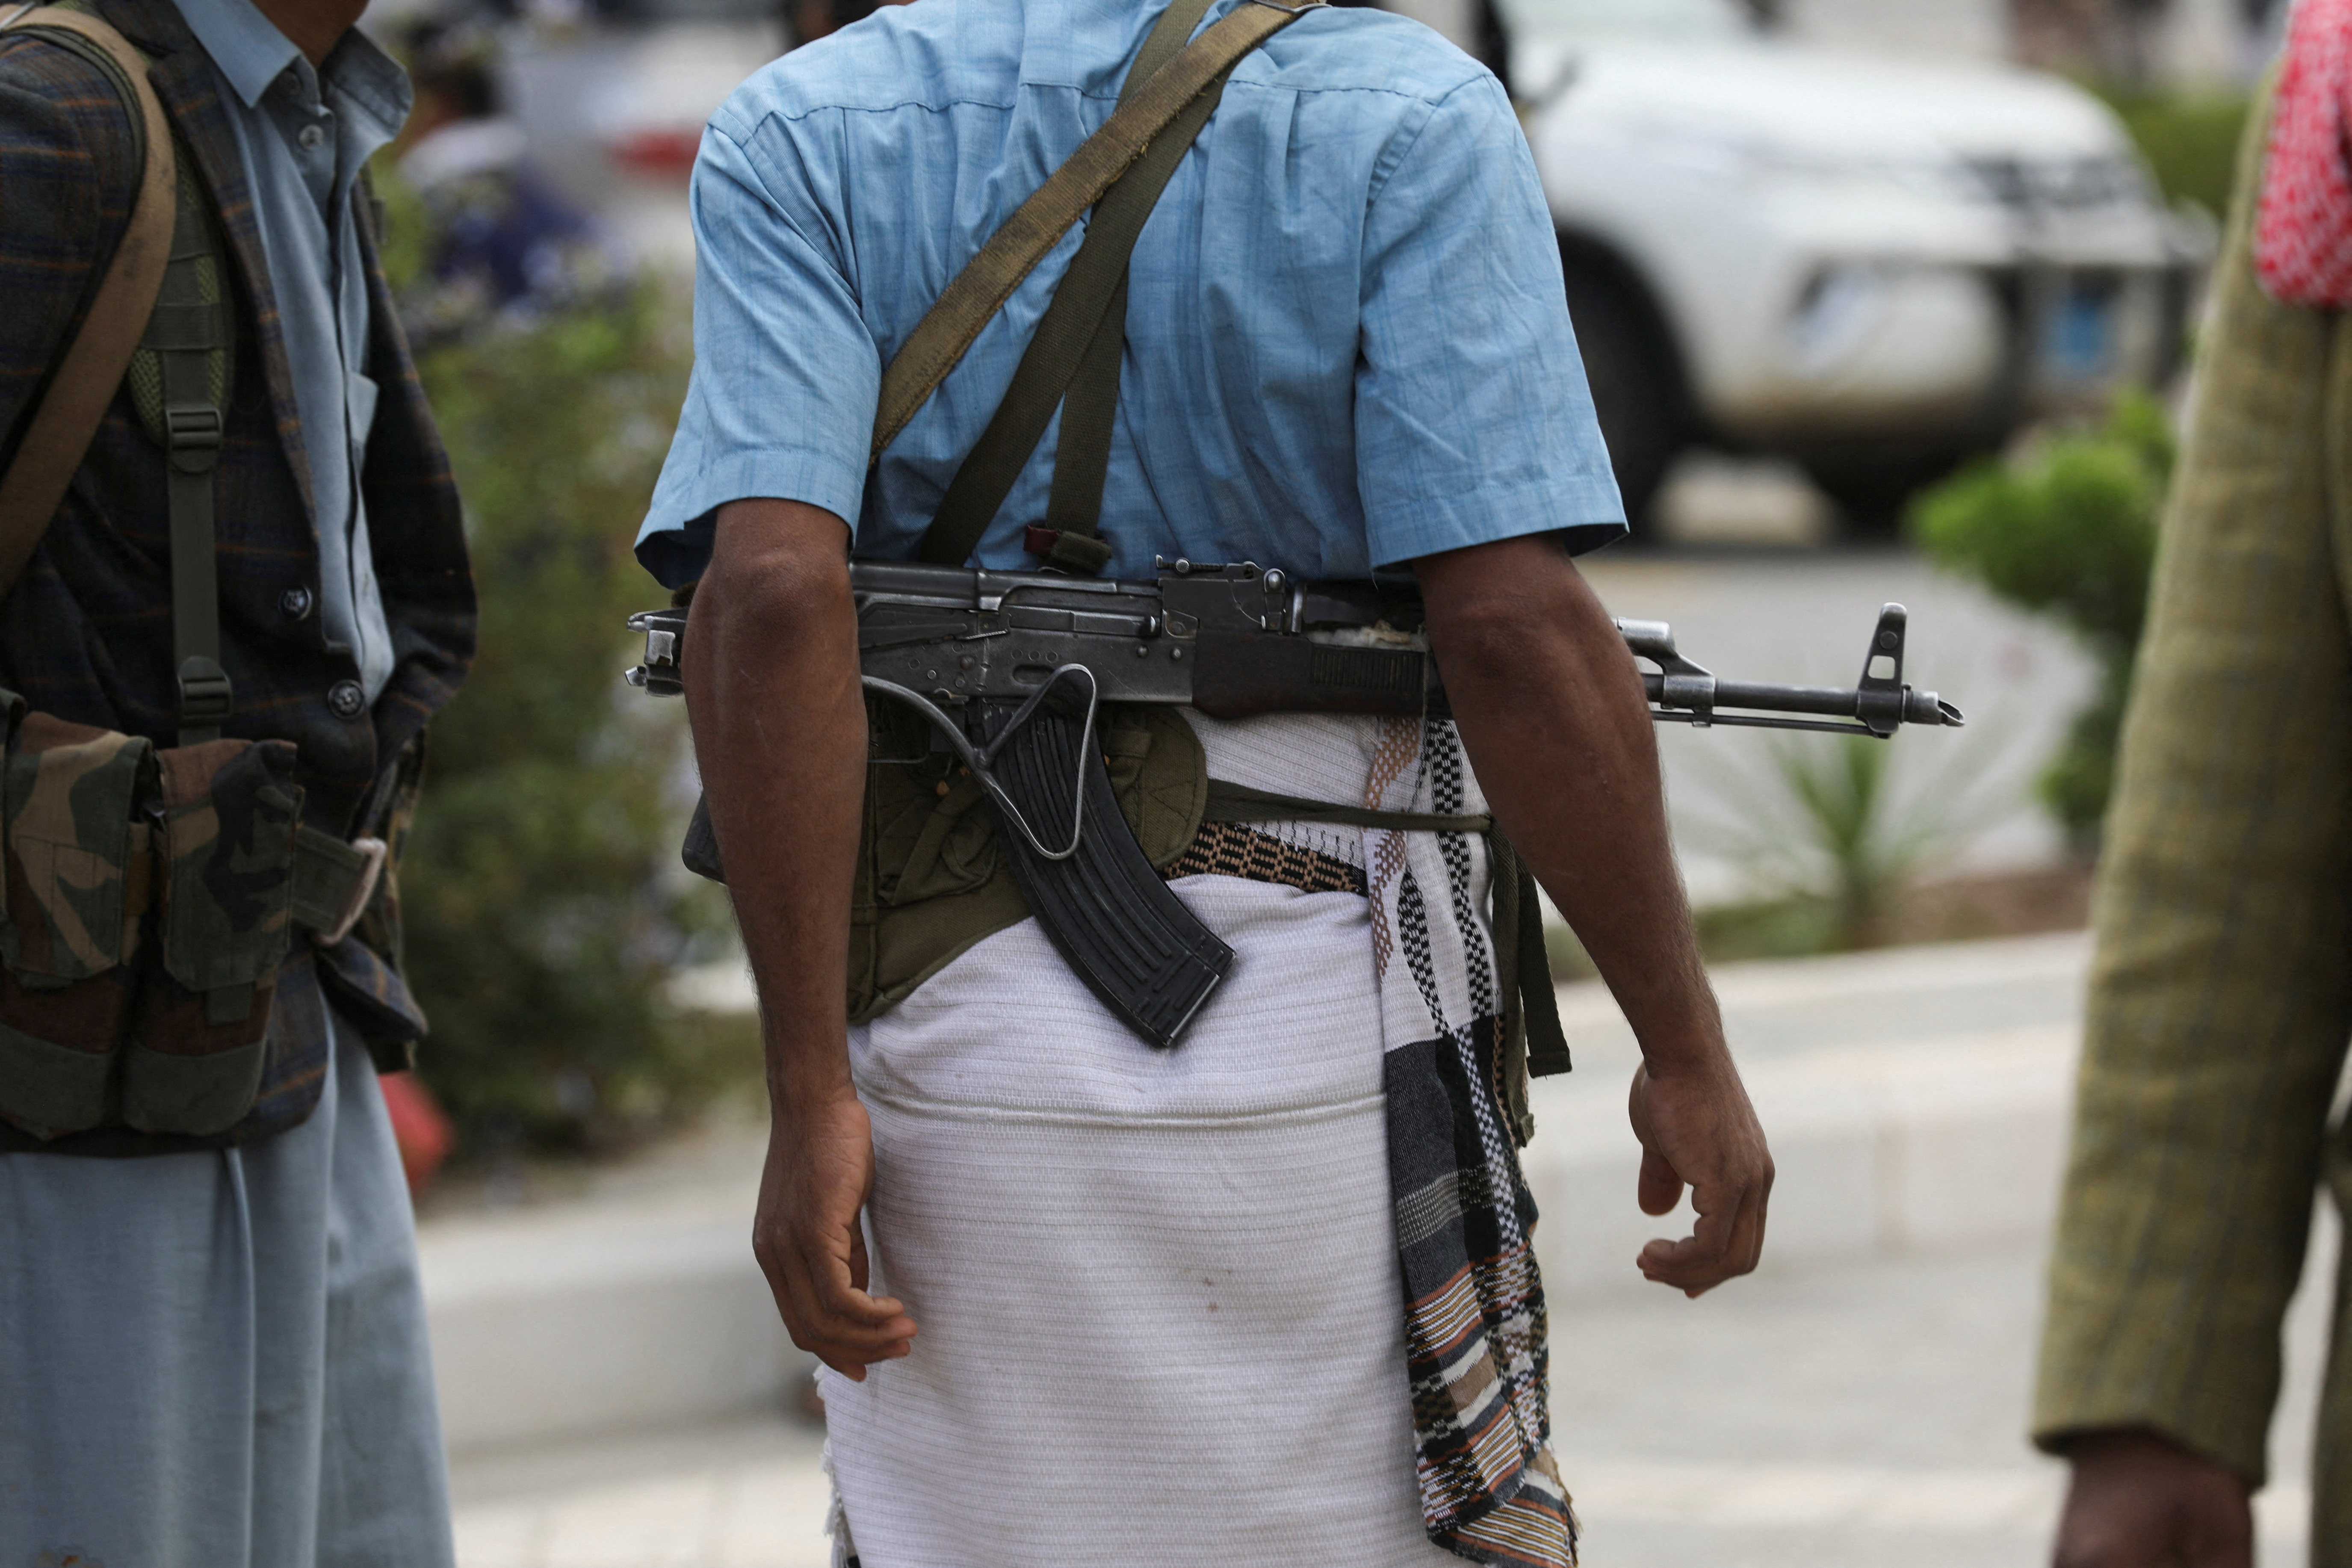 Tribesman carries a rifle during a prisoner release by the Houthis in Sanaa